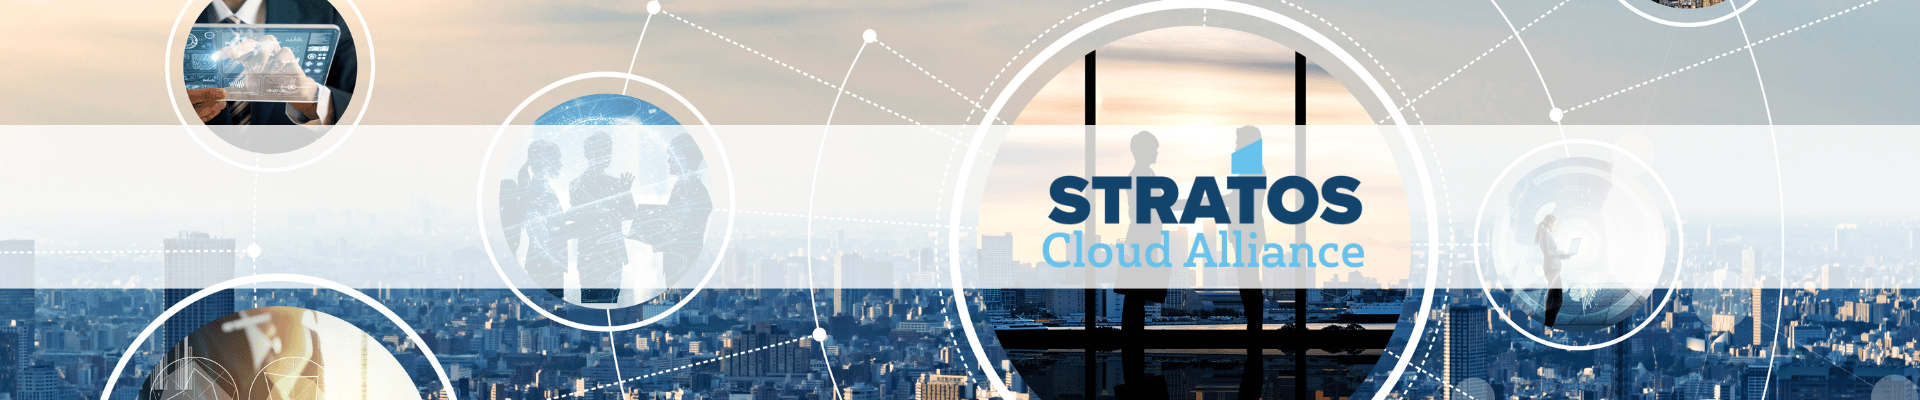 Stratos Cloud Alliance Microsoft Indirect Cloud Solution Provider 